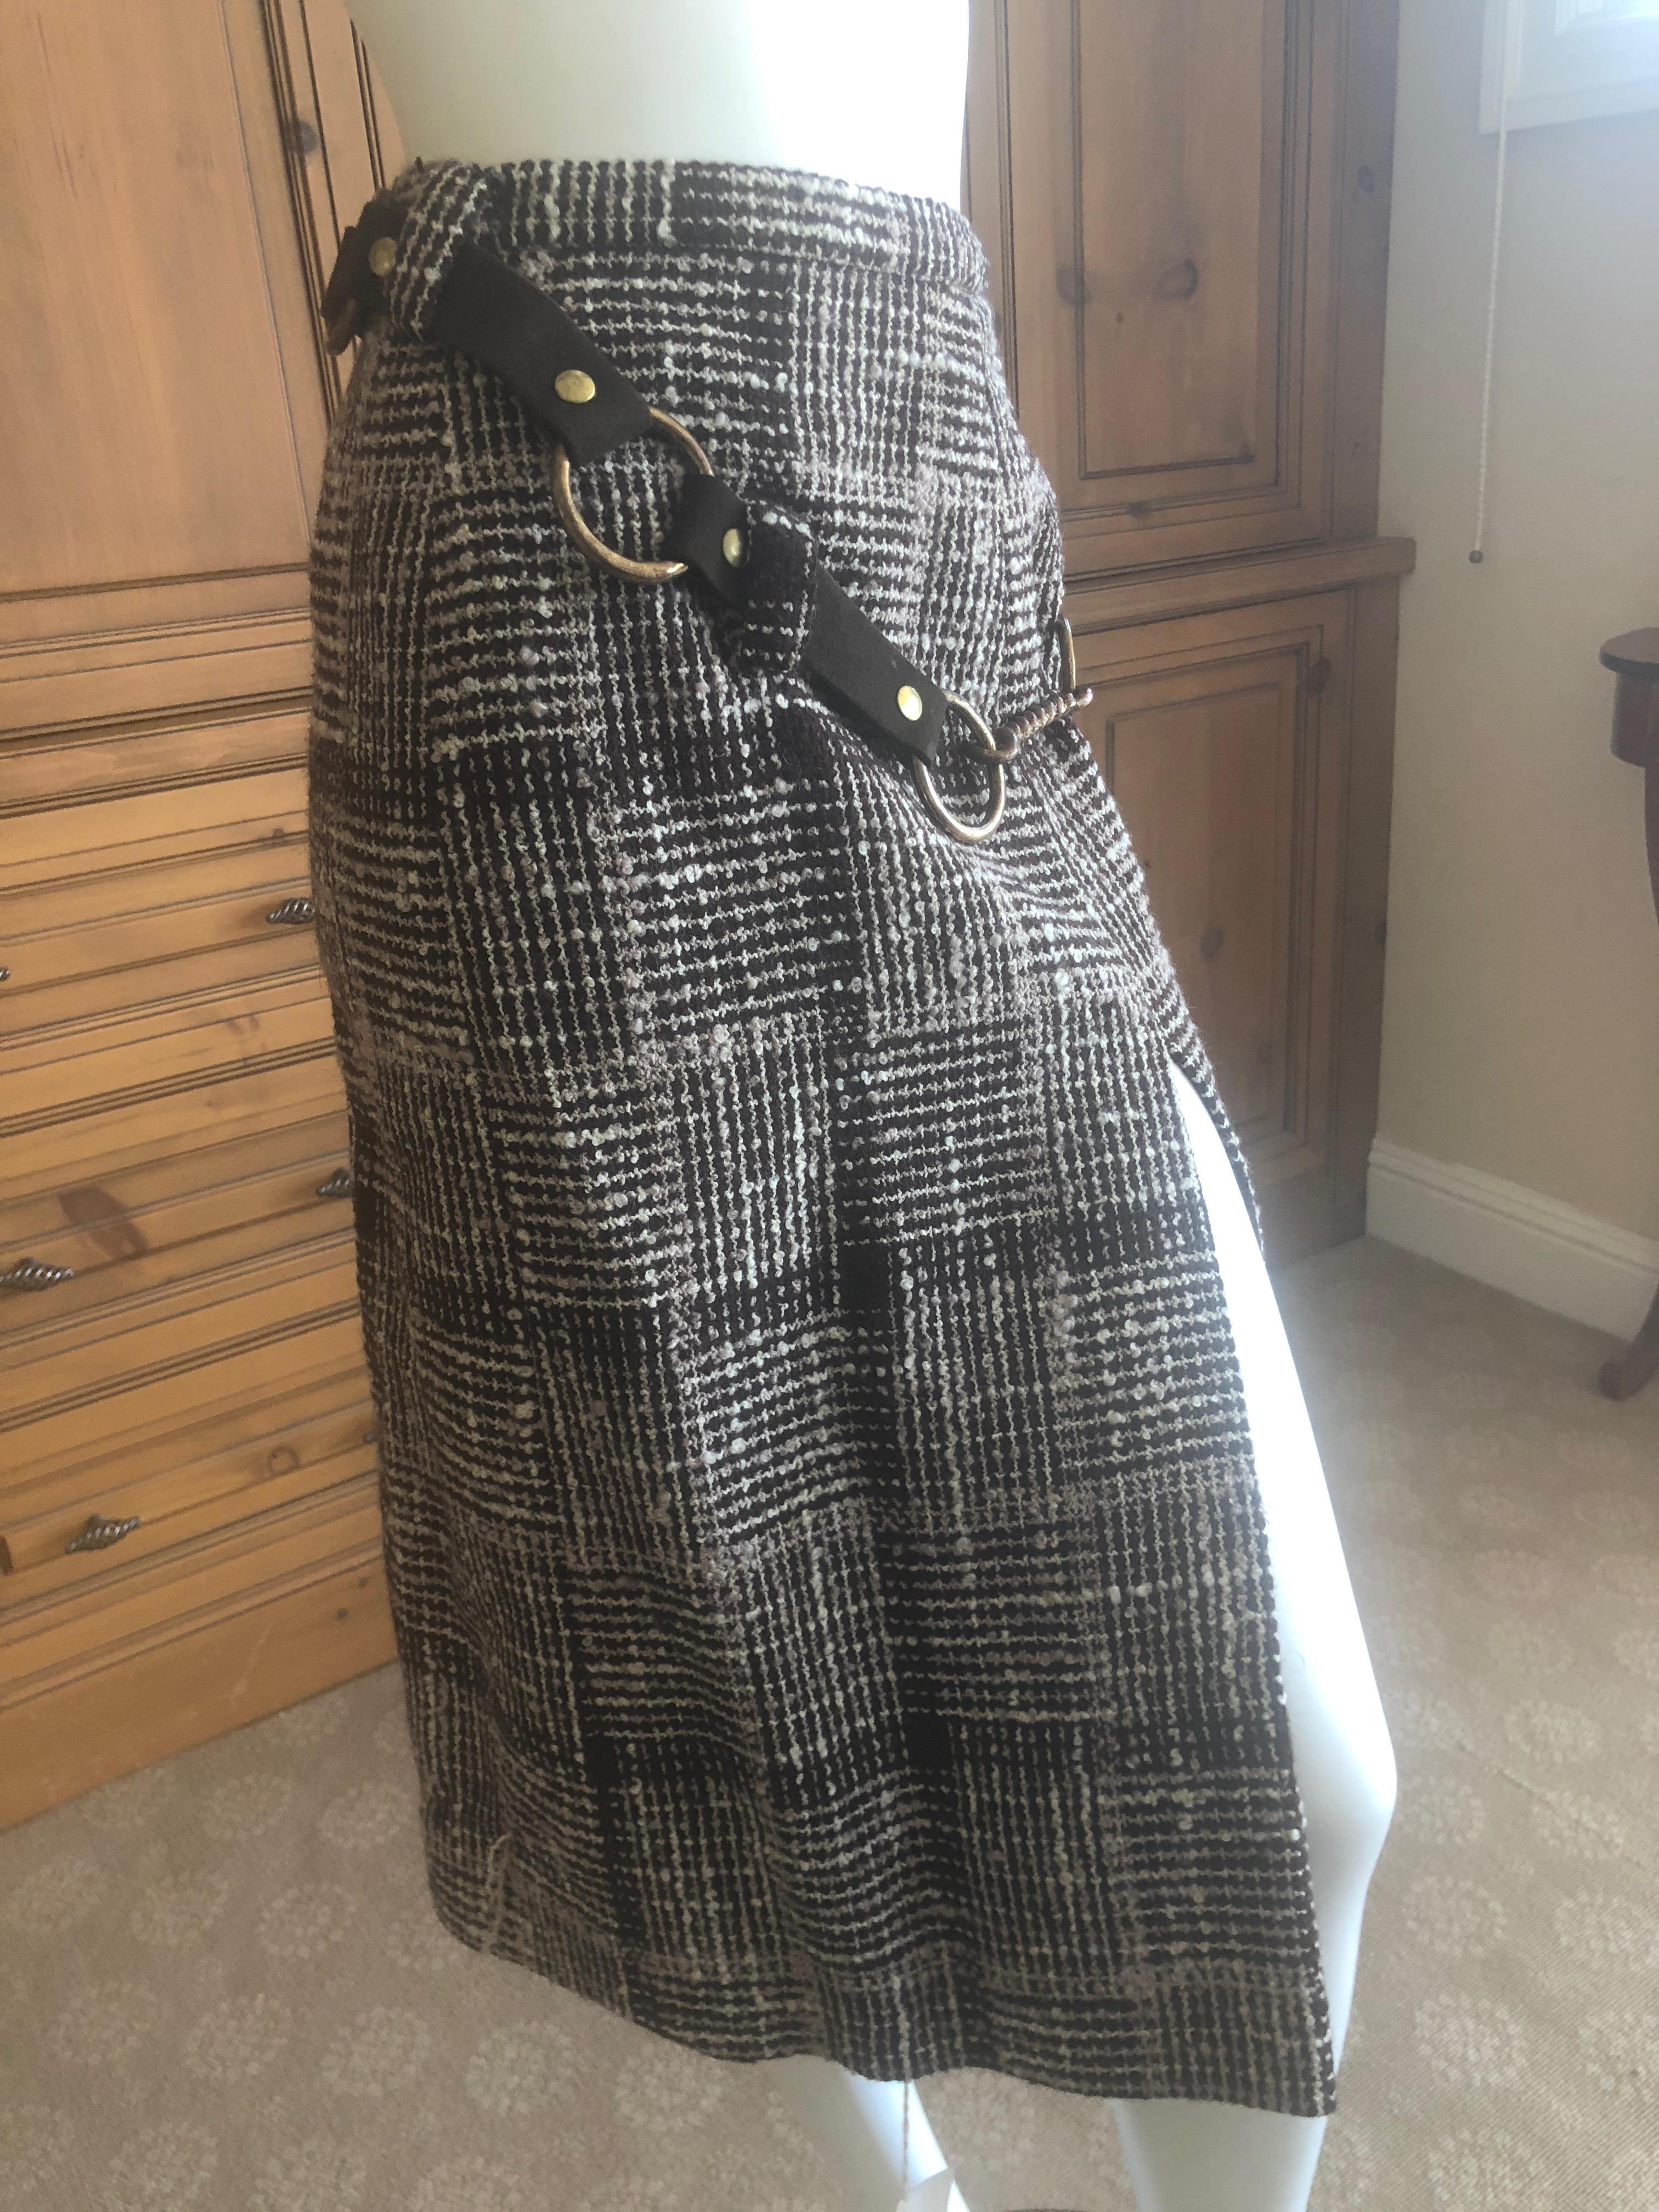 Cardinali Plaid Tweed Skirt with Bold Brass Hardware and Leather Belt Straps In Good Condition For Sale In Cloverdale, CA